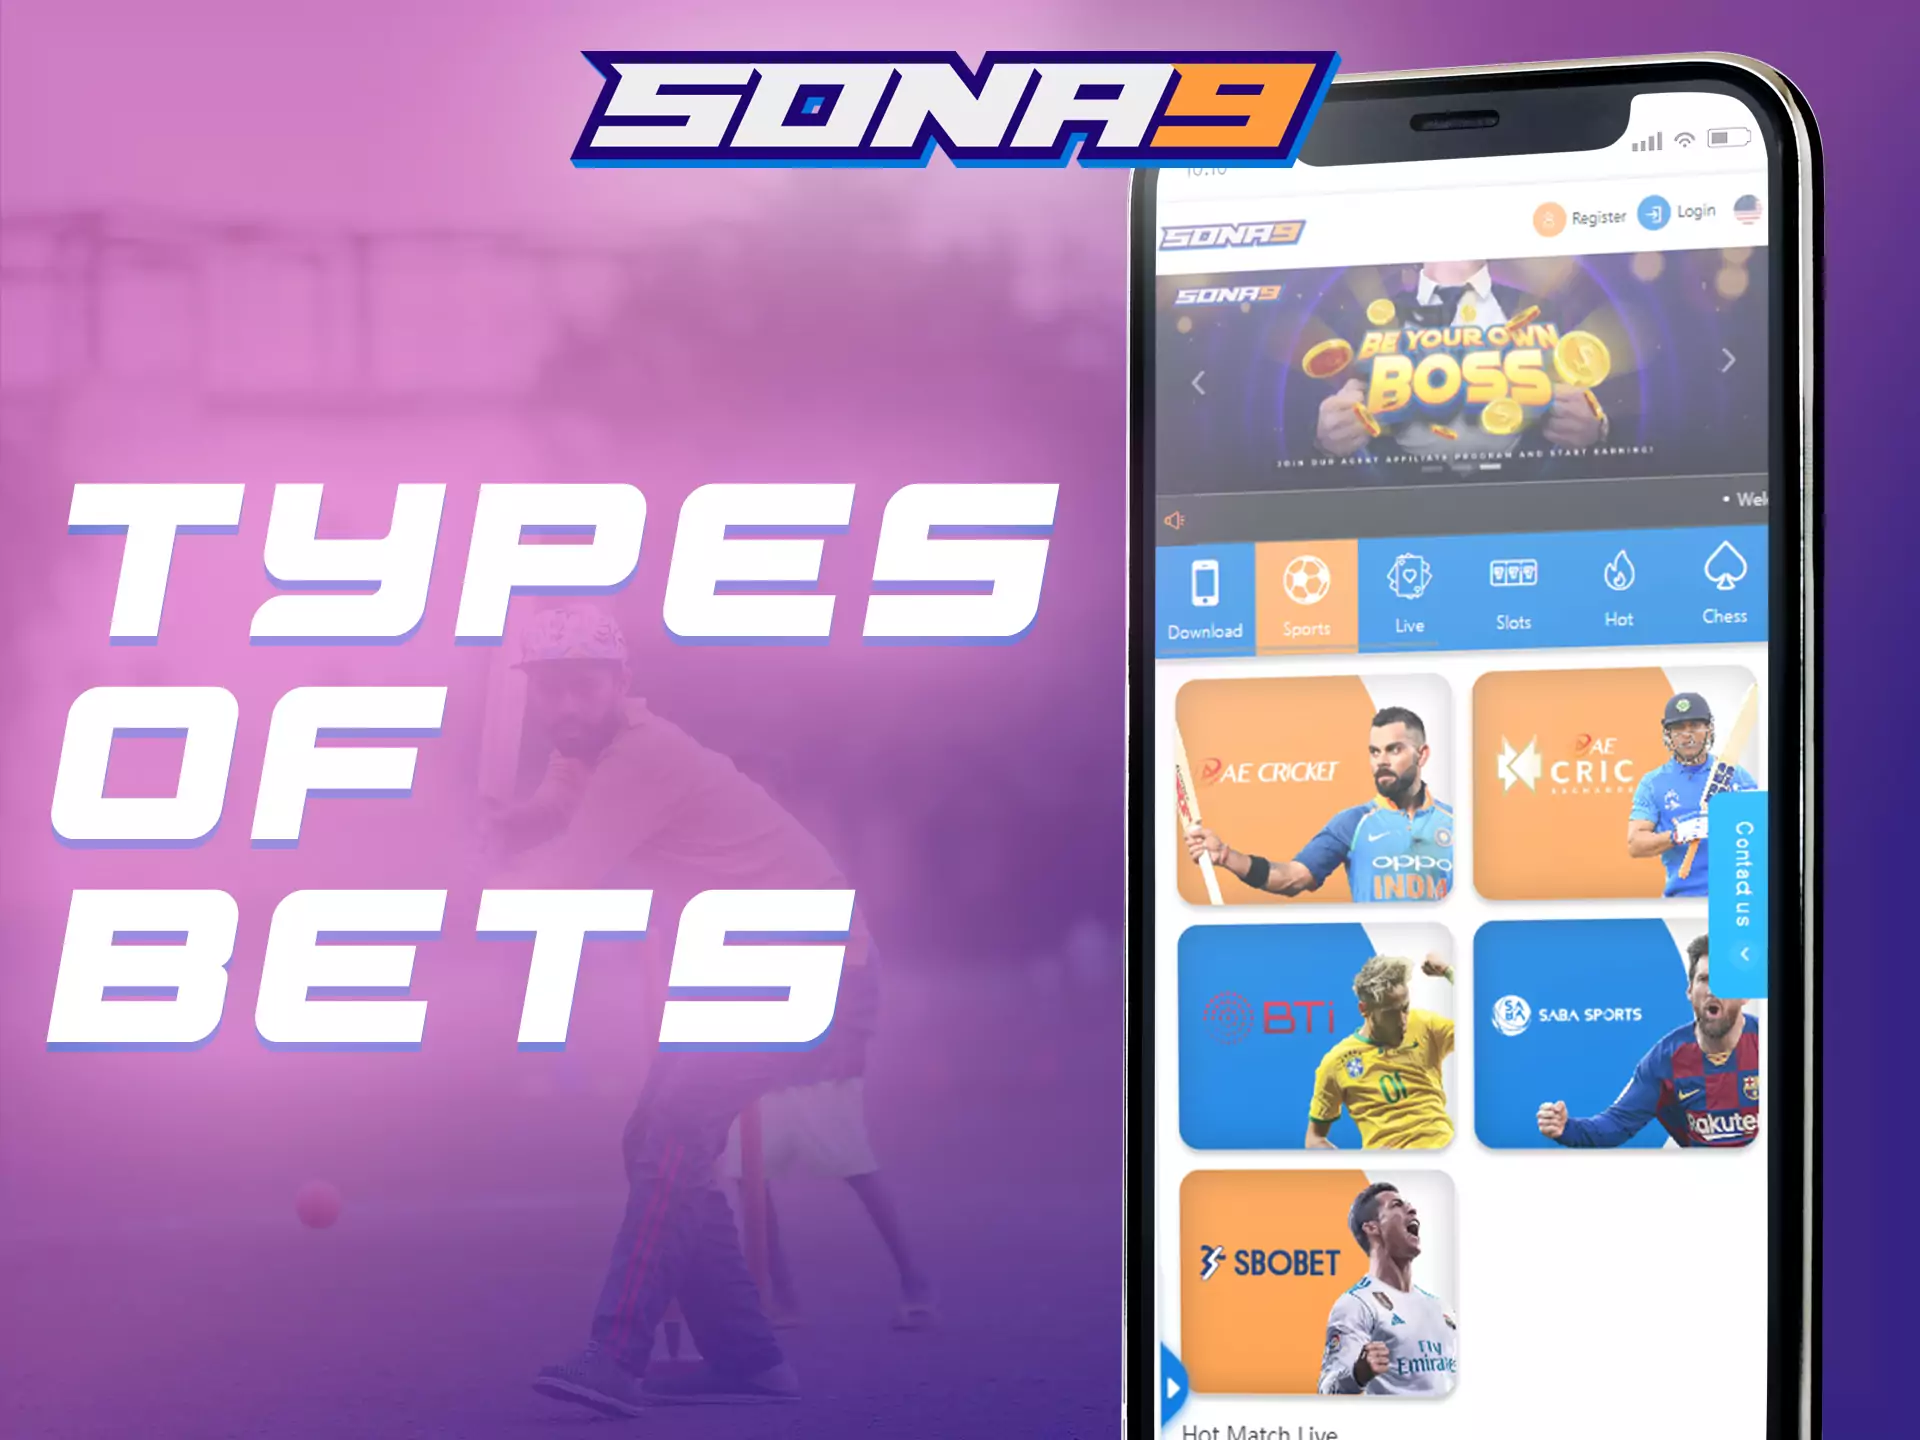 In the Sona9 app, you can place different types of bets.